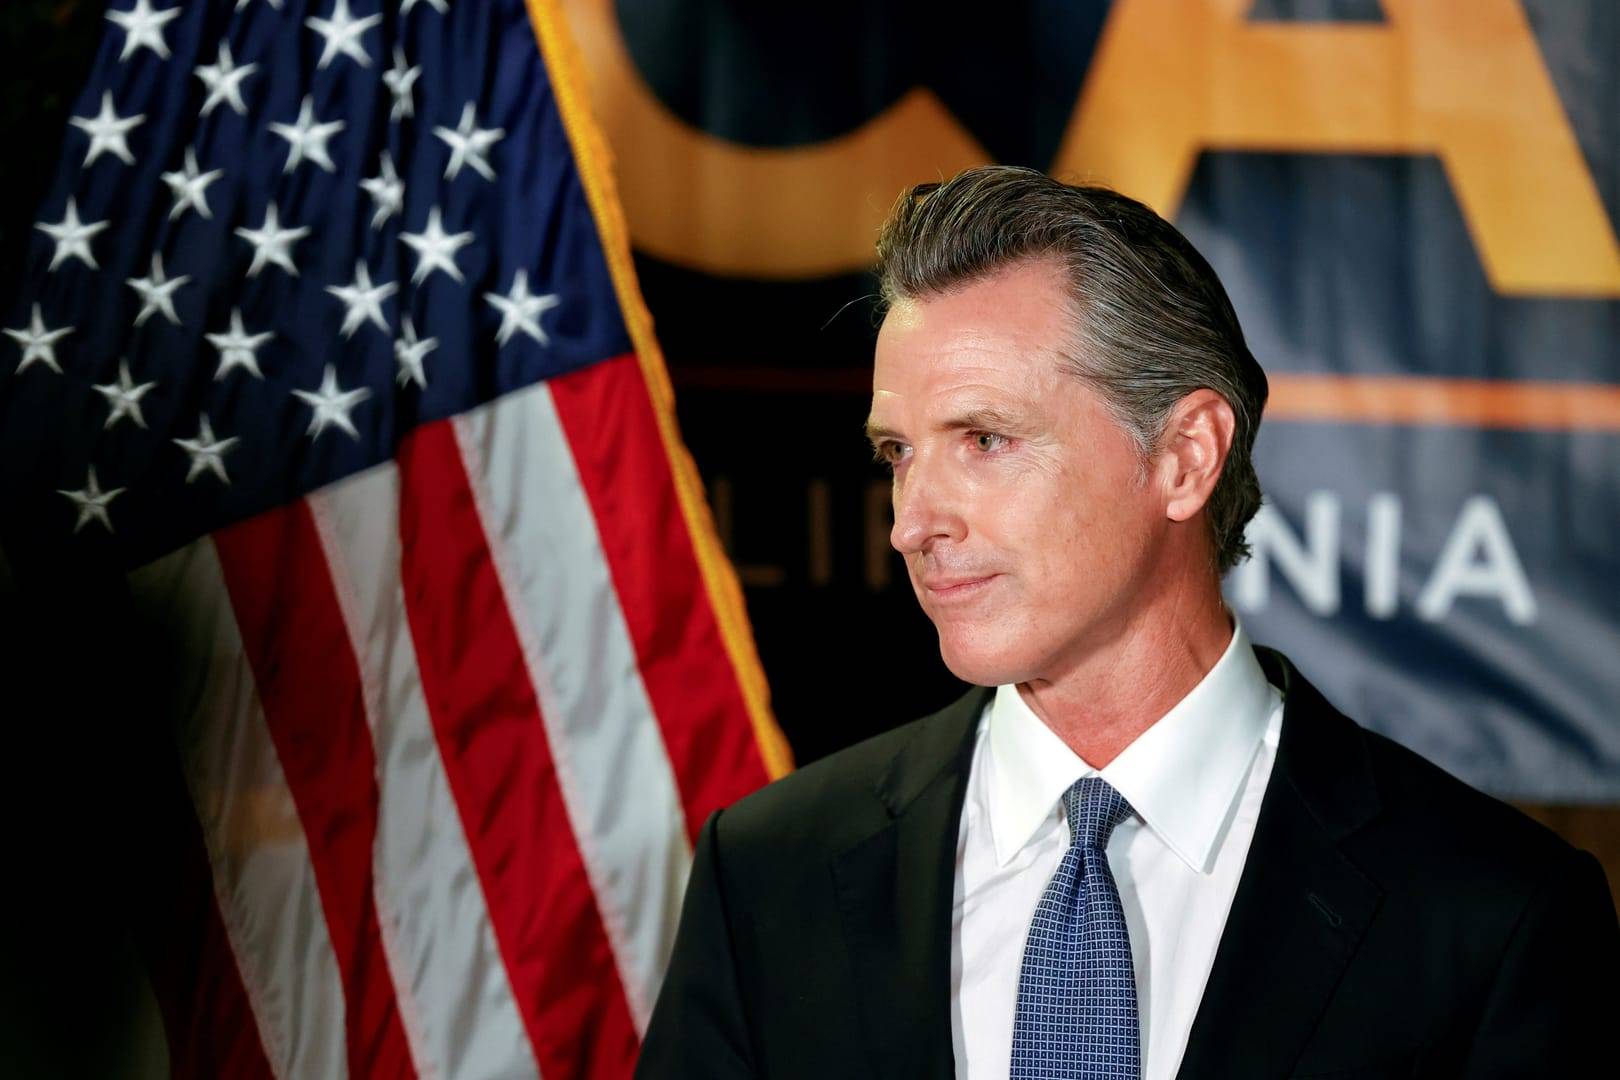 Gov. Gavin Newsom makes an appearance at the California Democratic Party headquarters in Sacramento Sept. 14, 2021. (Credit: Fred Greaves/Reuters via CNS.)